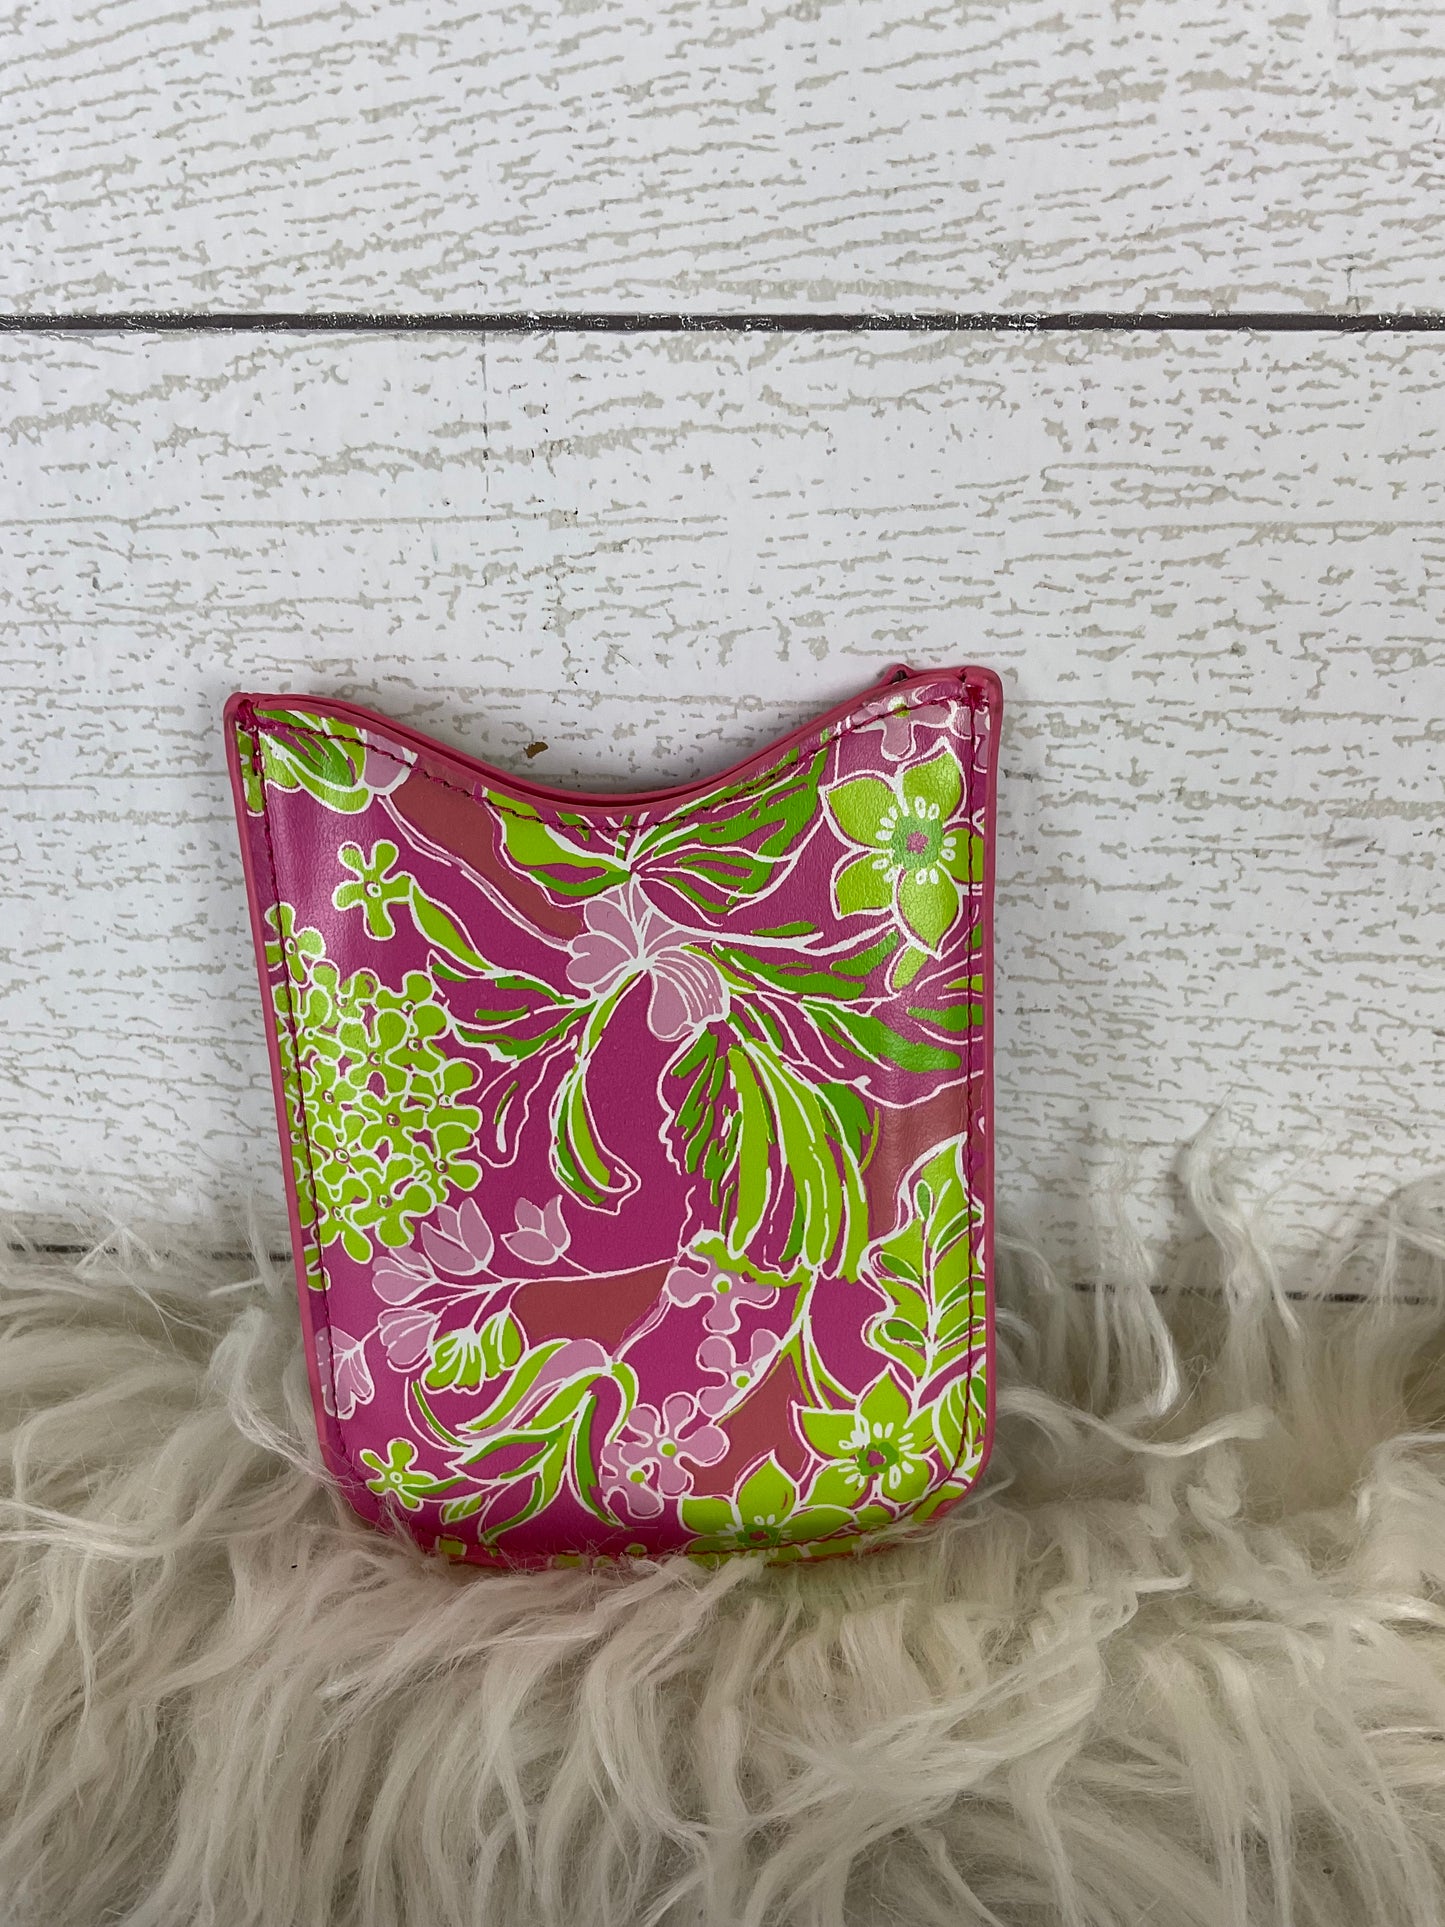 Wallet By Lilly Pulitzer  Size: Small